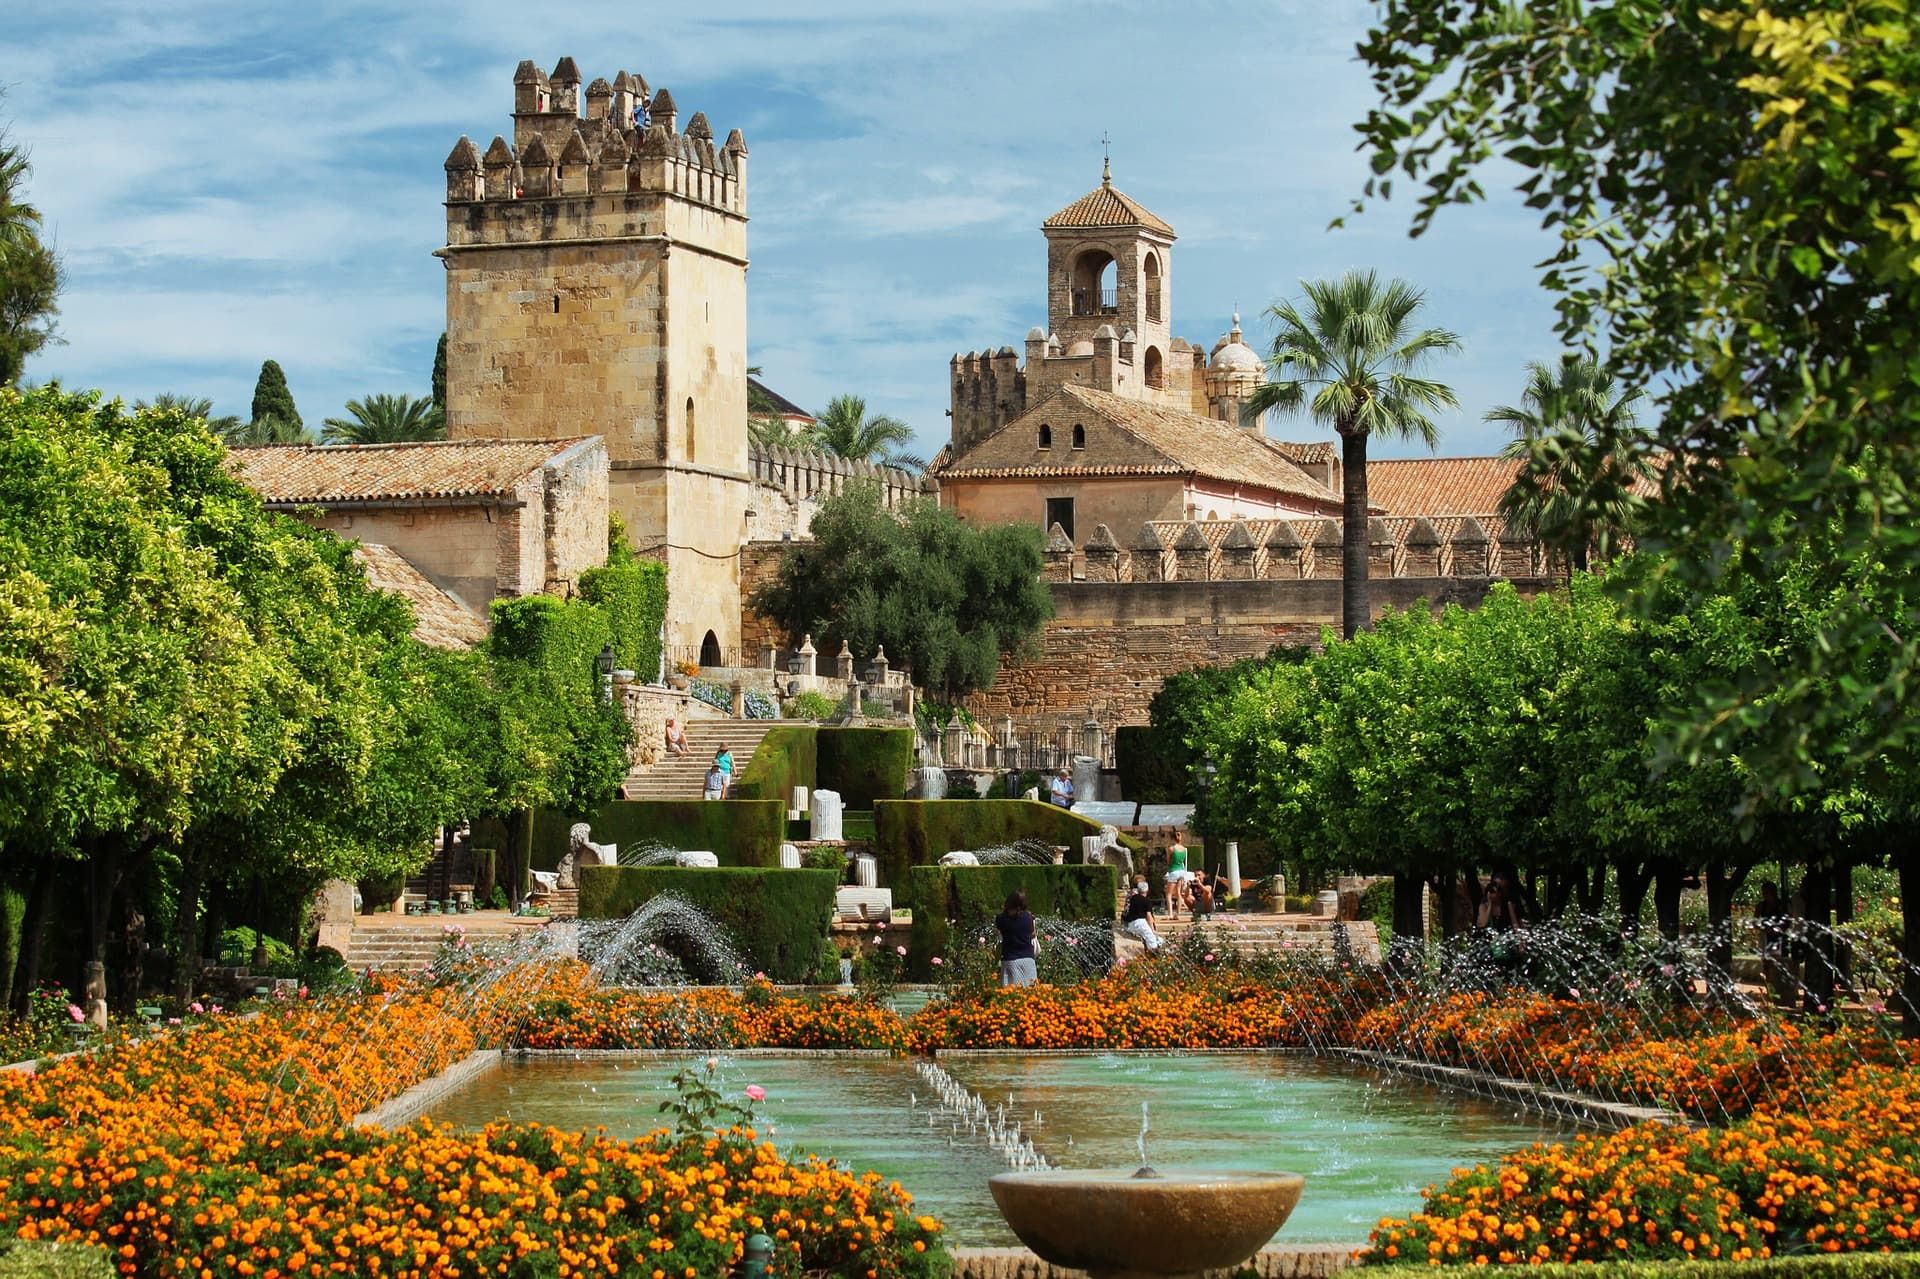 Getaway to Cordoba: Things to see and do in two days